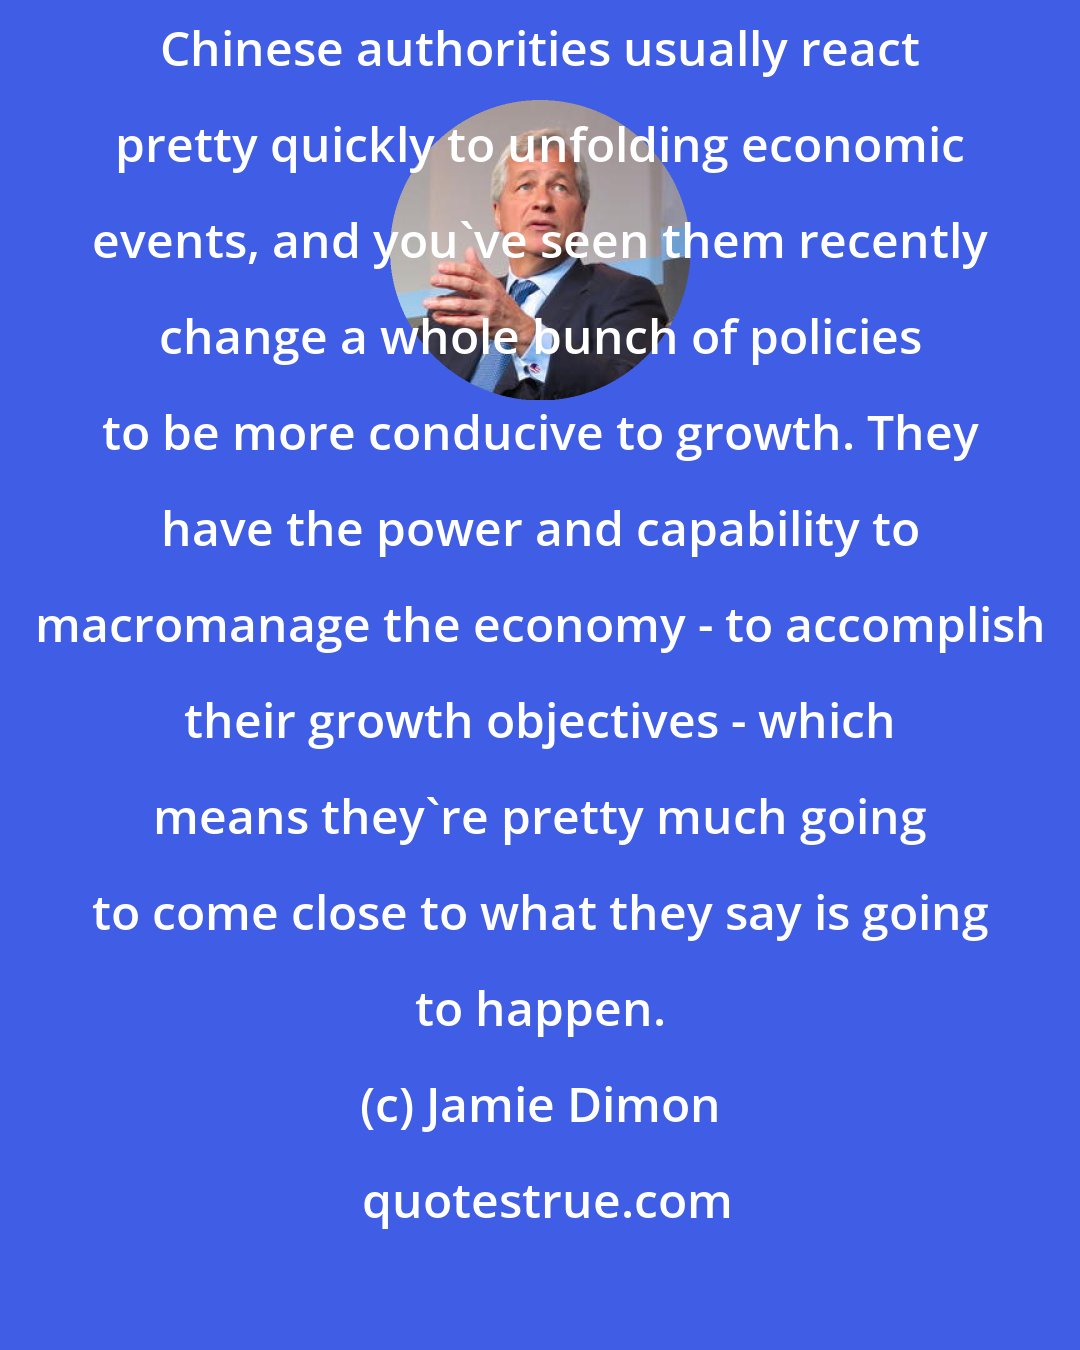 Jamie Dimon: Over the longer term, China will grow by about 6% or 7% per year. The Chinese authorities usually react pretty quickly to unfolding economic events, and you've seen them recently change a whole bunch of policies to be more conducive to growth. They have the power and capability to macromanage the economy - to accomplish their growth objectives - which means they're pretty much going to come close to what they say is going to happen.